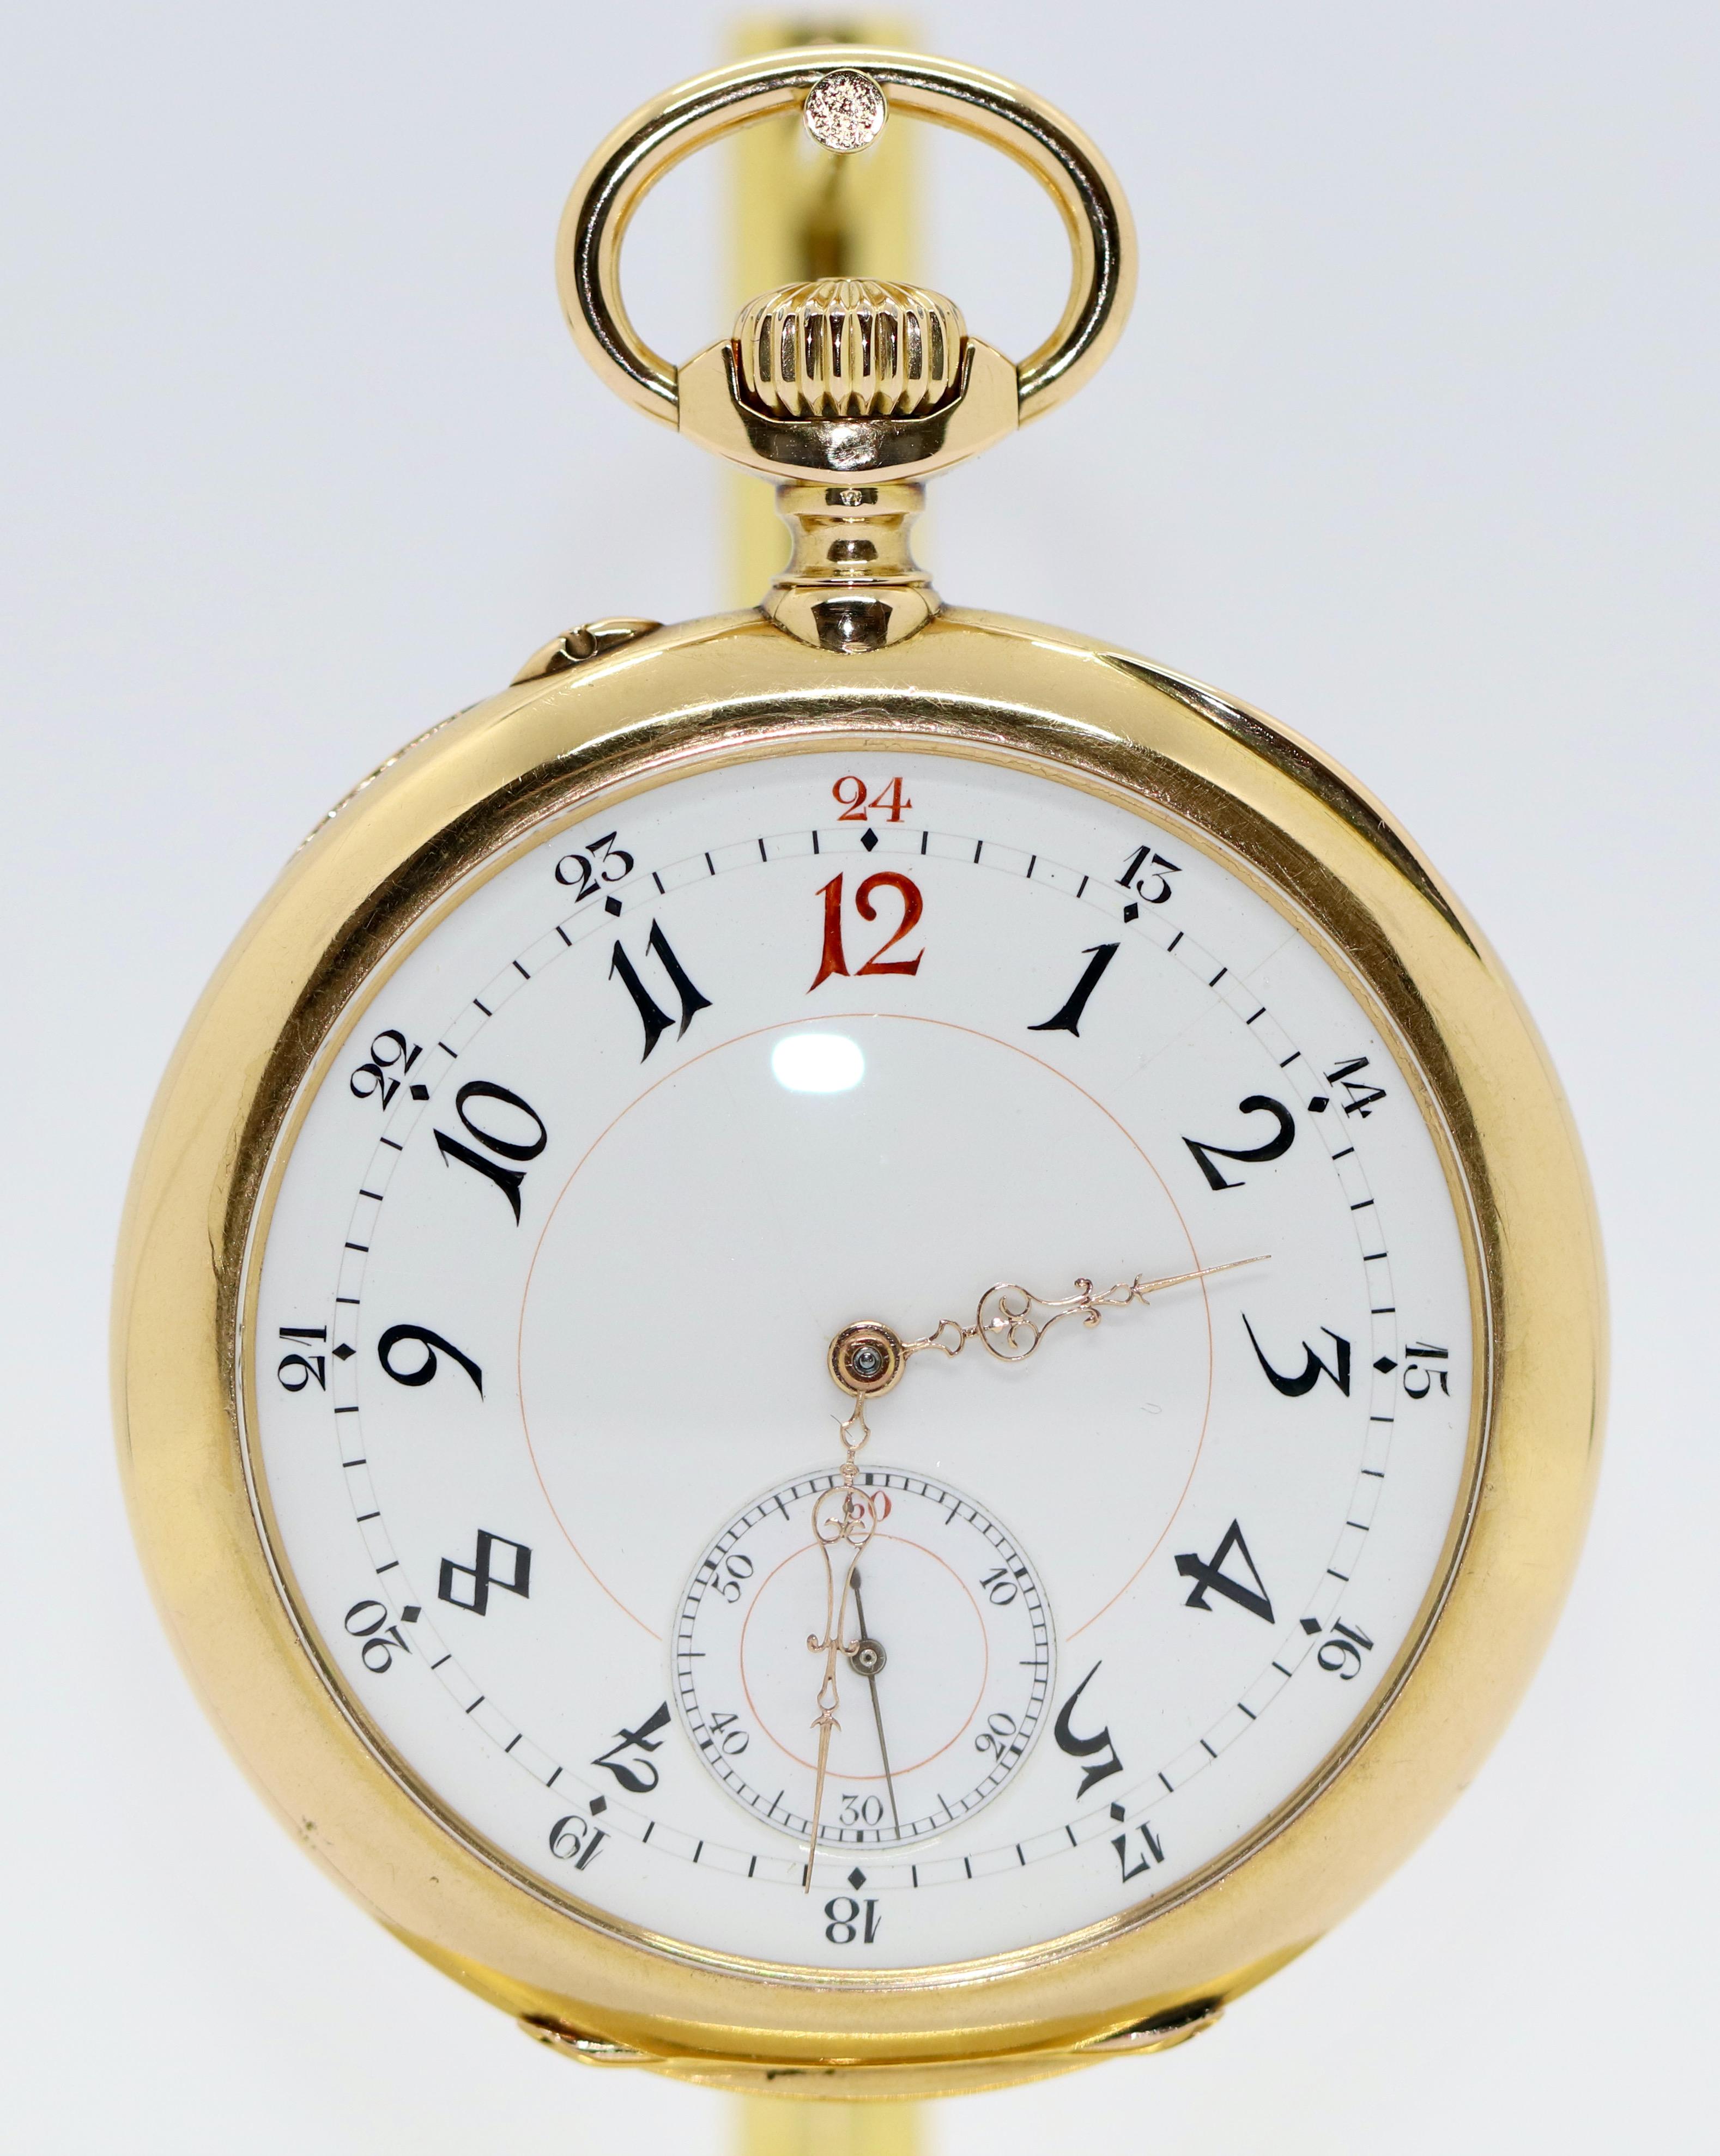 Vacheron & Constantin Grottendieck Bruxelles 18 Karat Gold Pocket Watch

Movement can be wound and works. 

Dial with hairline crack. 

Including certificate of authenticity.